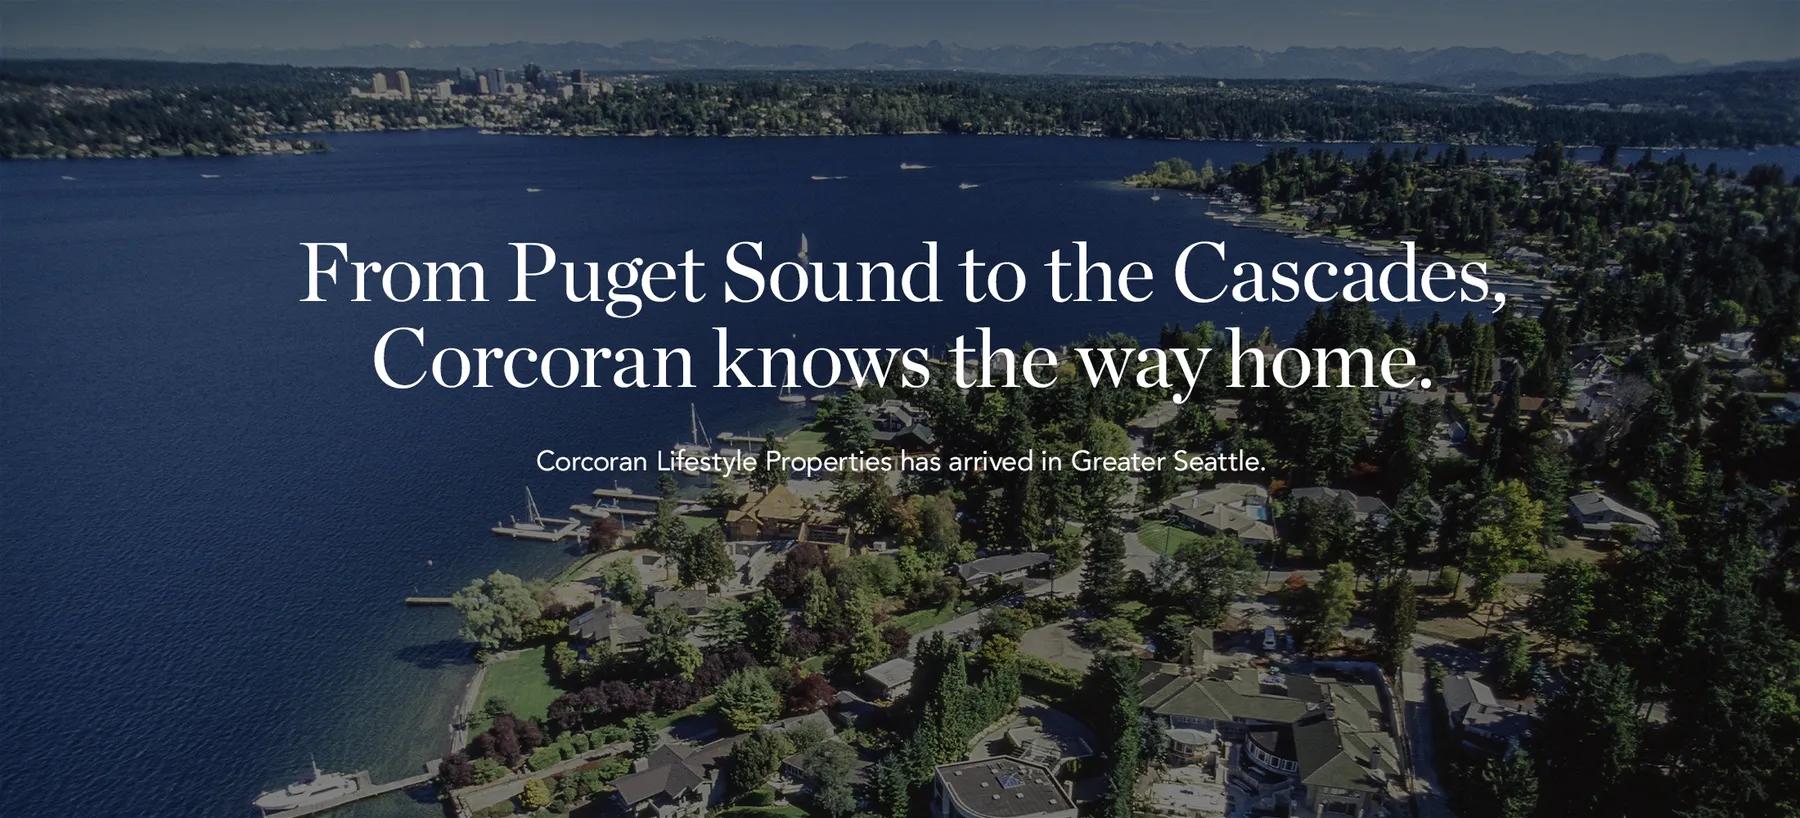 From Puget Sound to the Cascades, Corcoran knows the way home. Corcoran Lifestyle Properties has arrived in Greater Seattle.